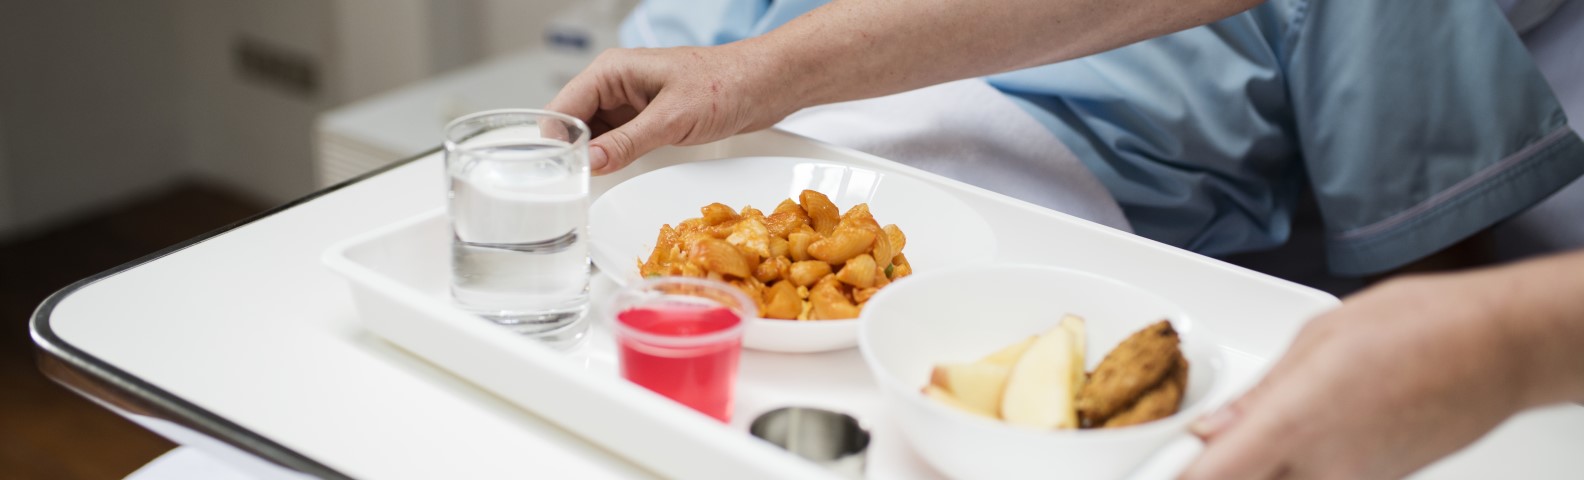 Tray with a variety of food and drinks placed on a bed, part of the Patient Meal Service